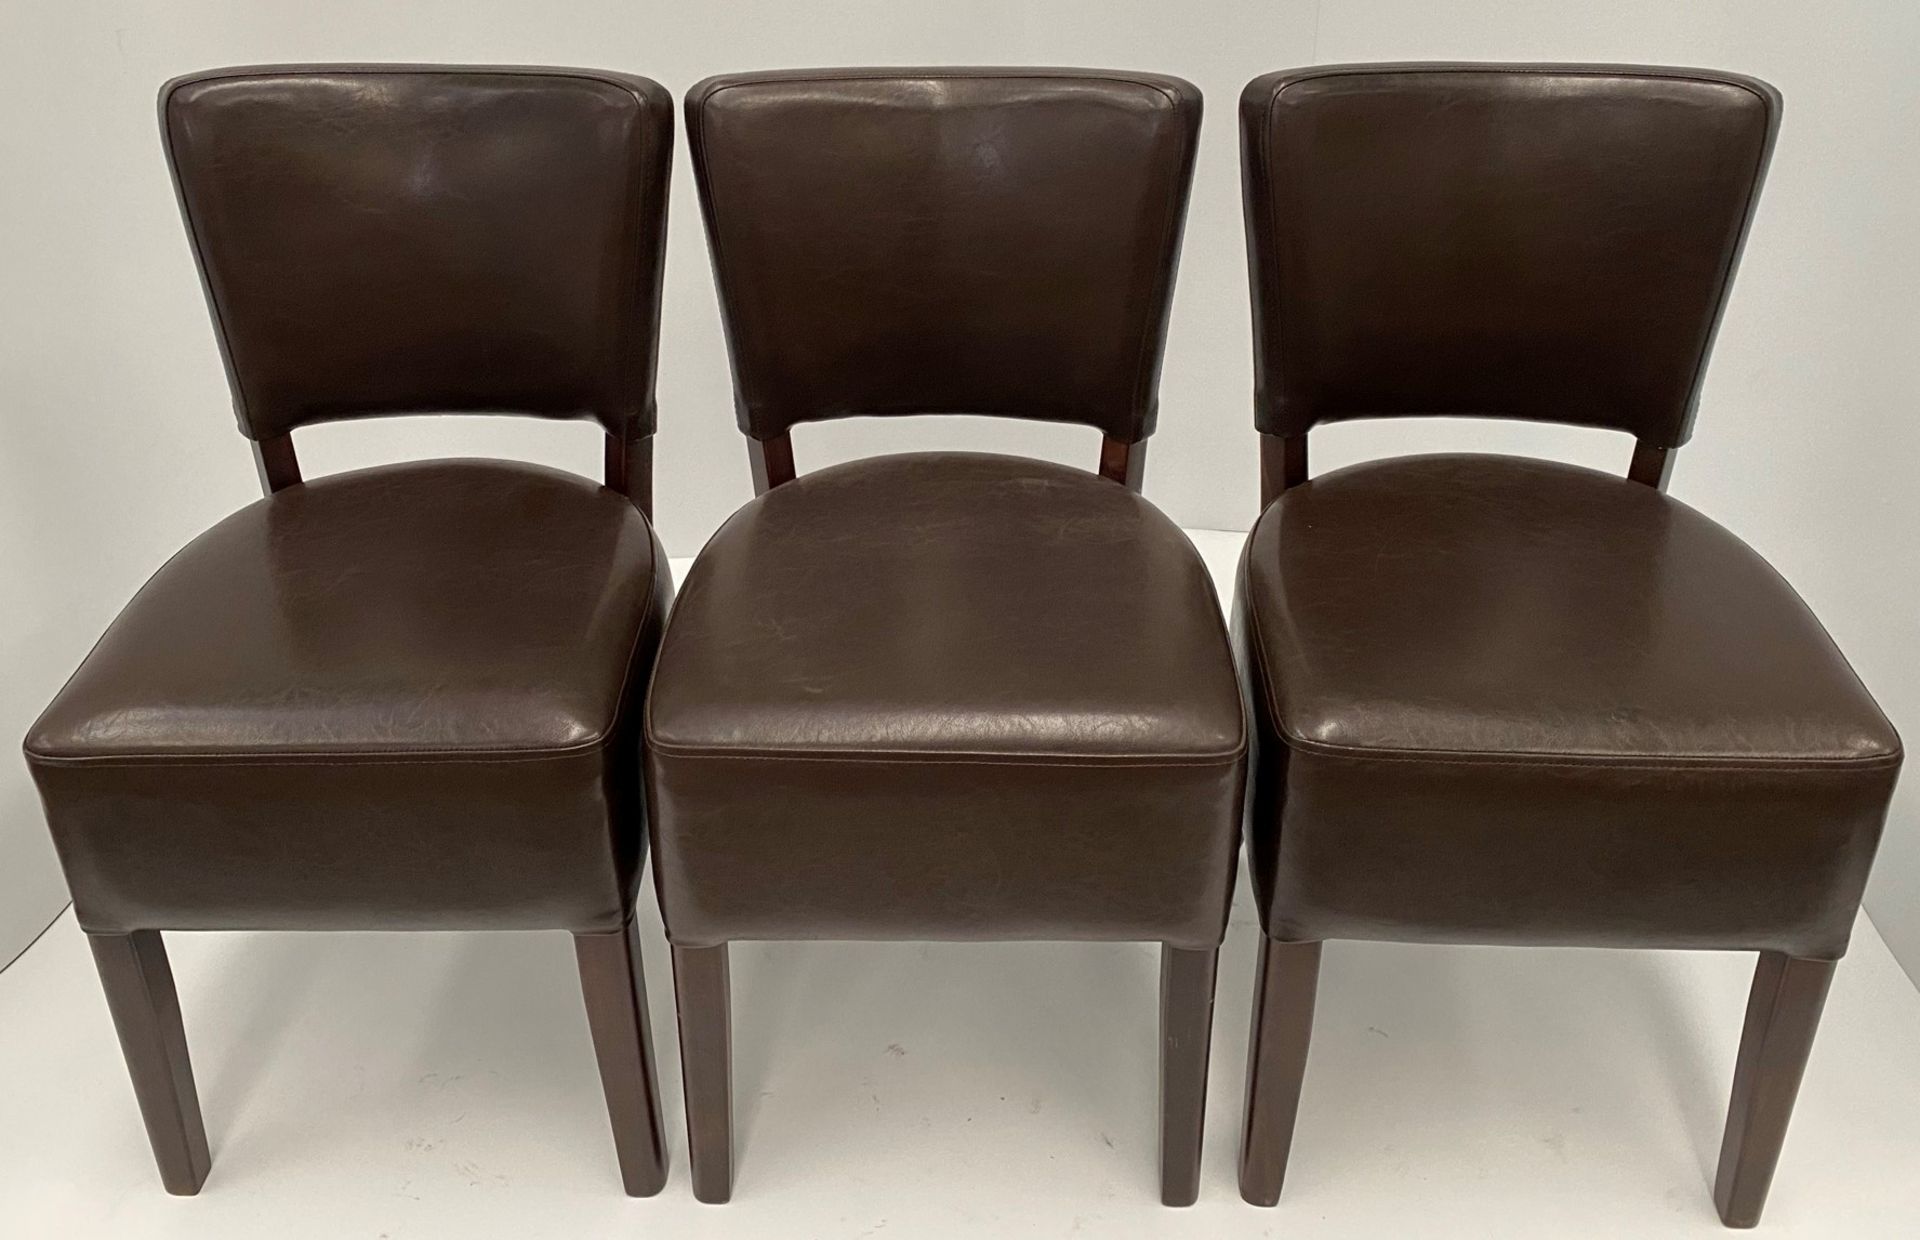 3 x Memphis Margo BR-5 Dark Brown side/dining chairs with walnut coloured frames